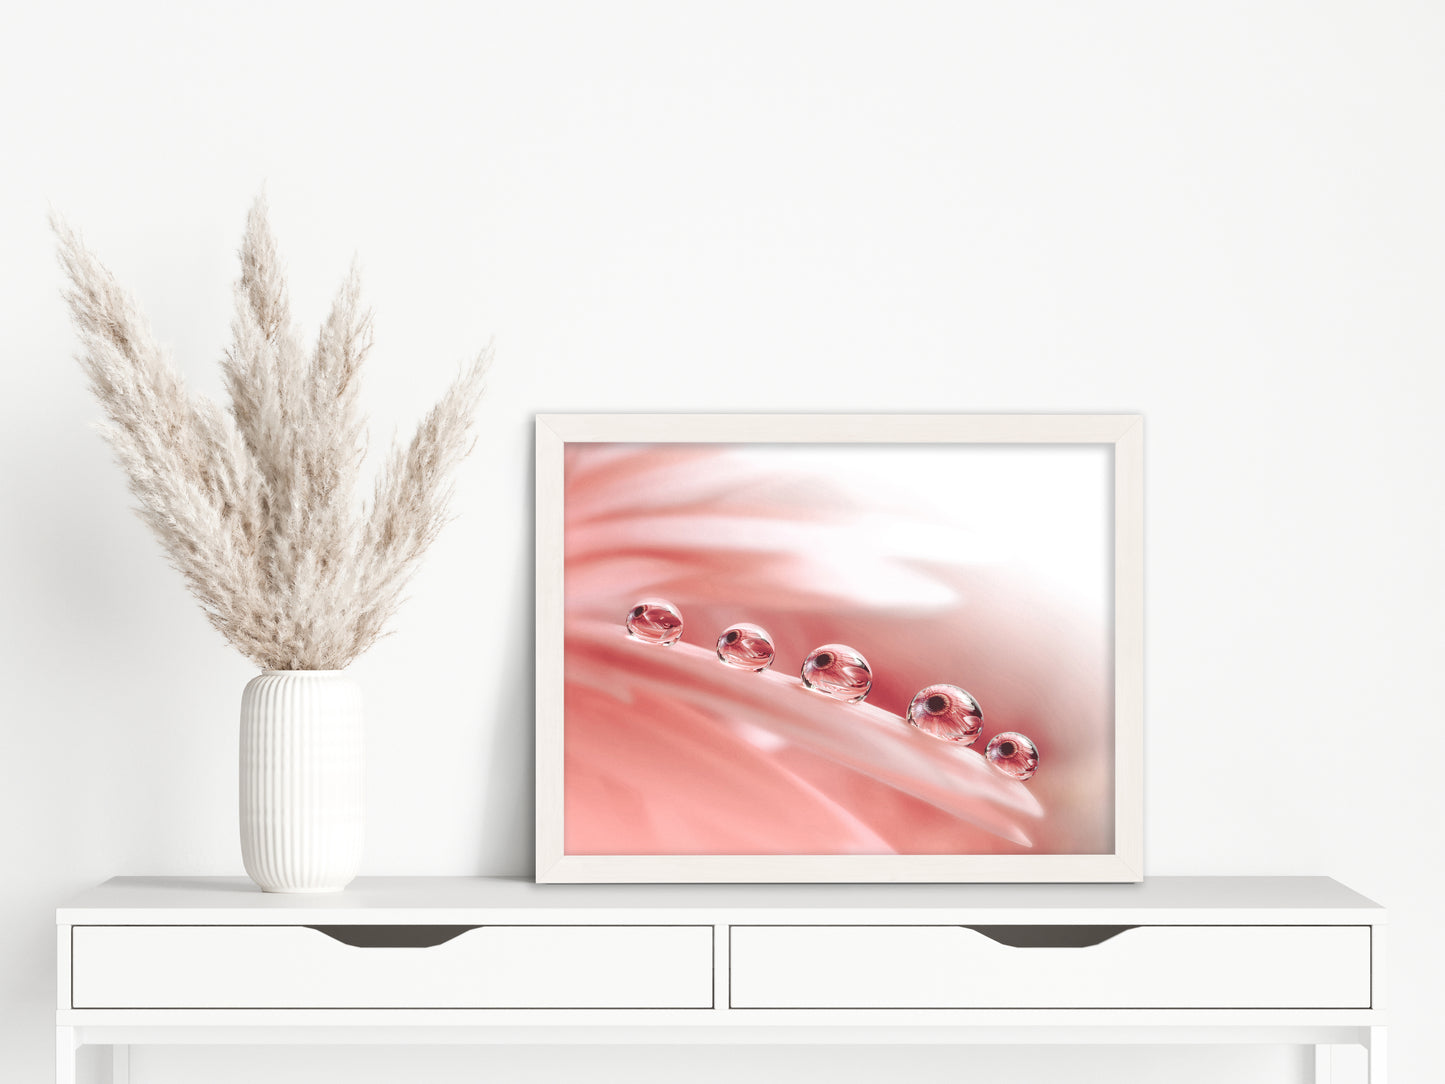 Pink Flower Pictures Framed: Dew Drops on Gerbera Daisy Petals Floral Botanical Photograph Shabby Chic - Vintage Framed Wall Art Print